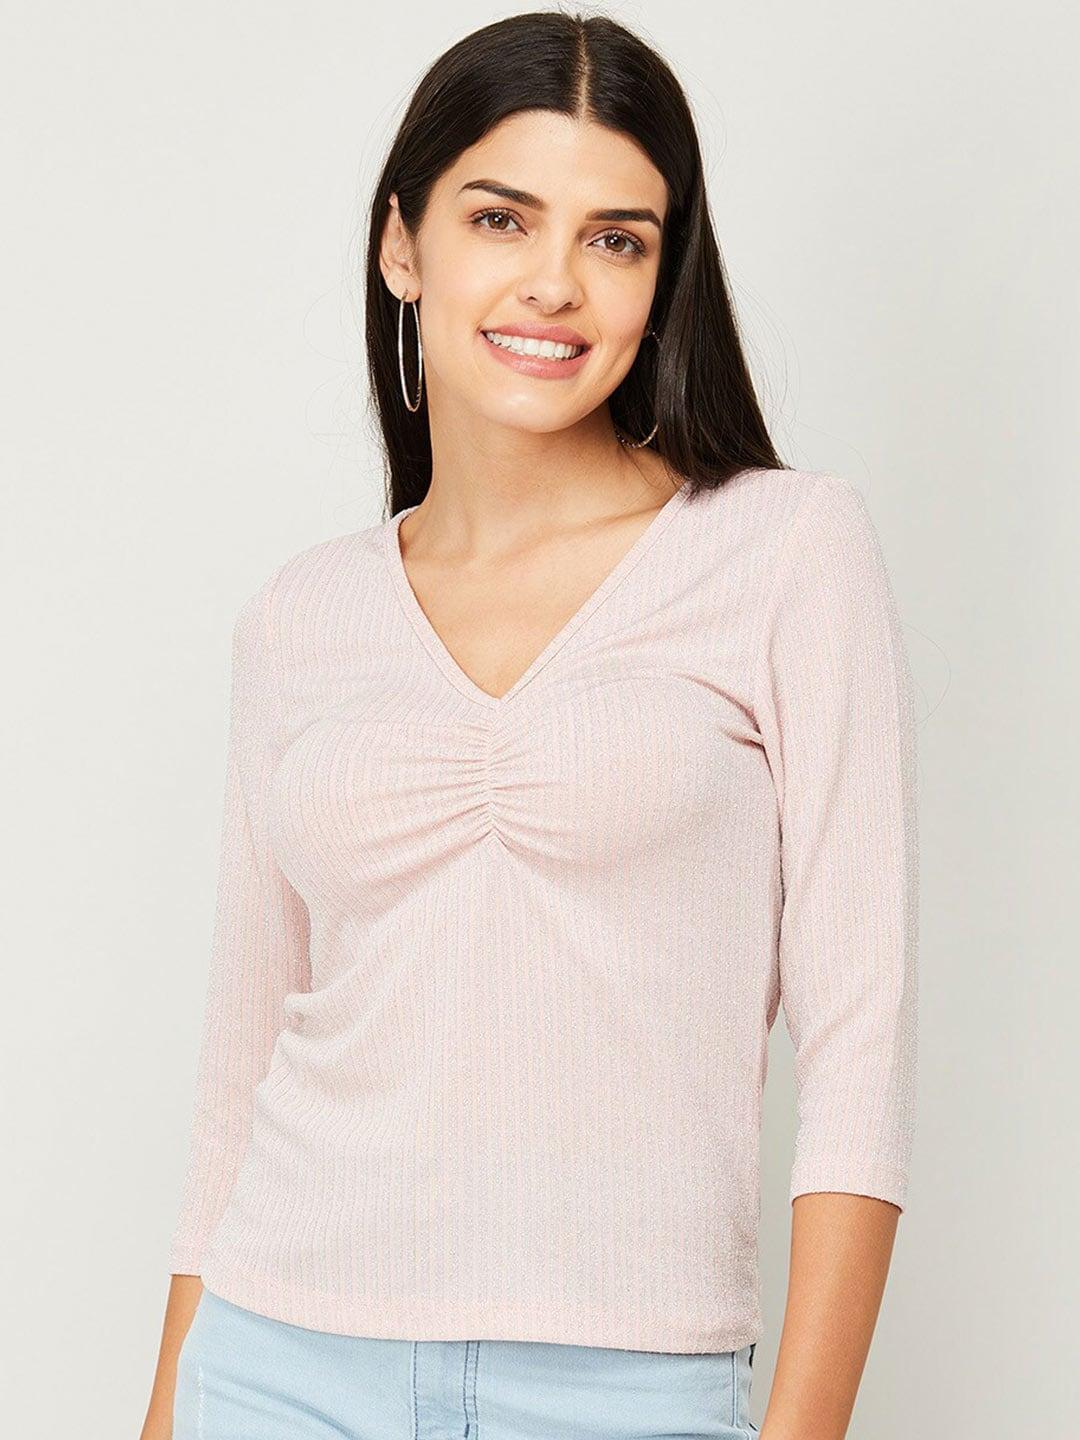 code by lifestyle women peach-colored top